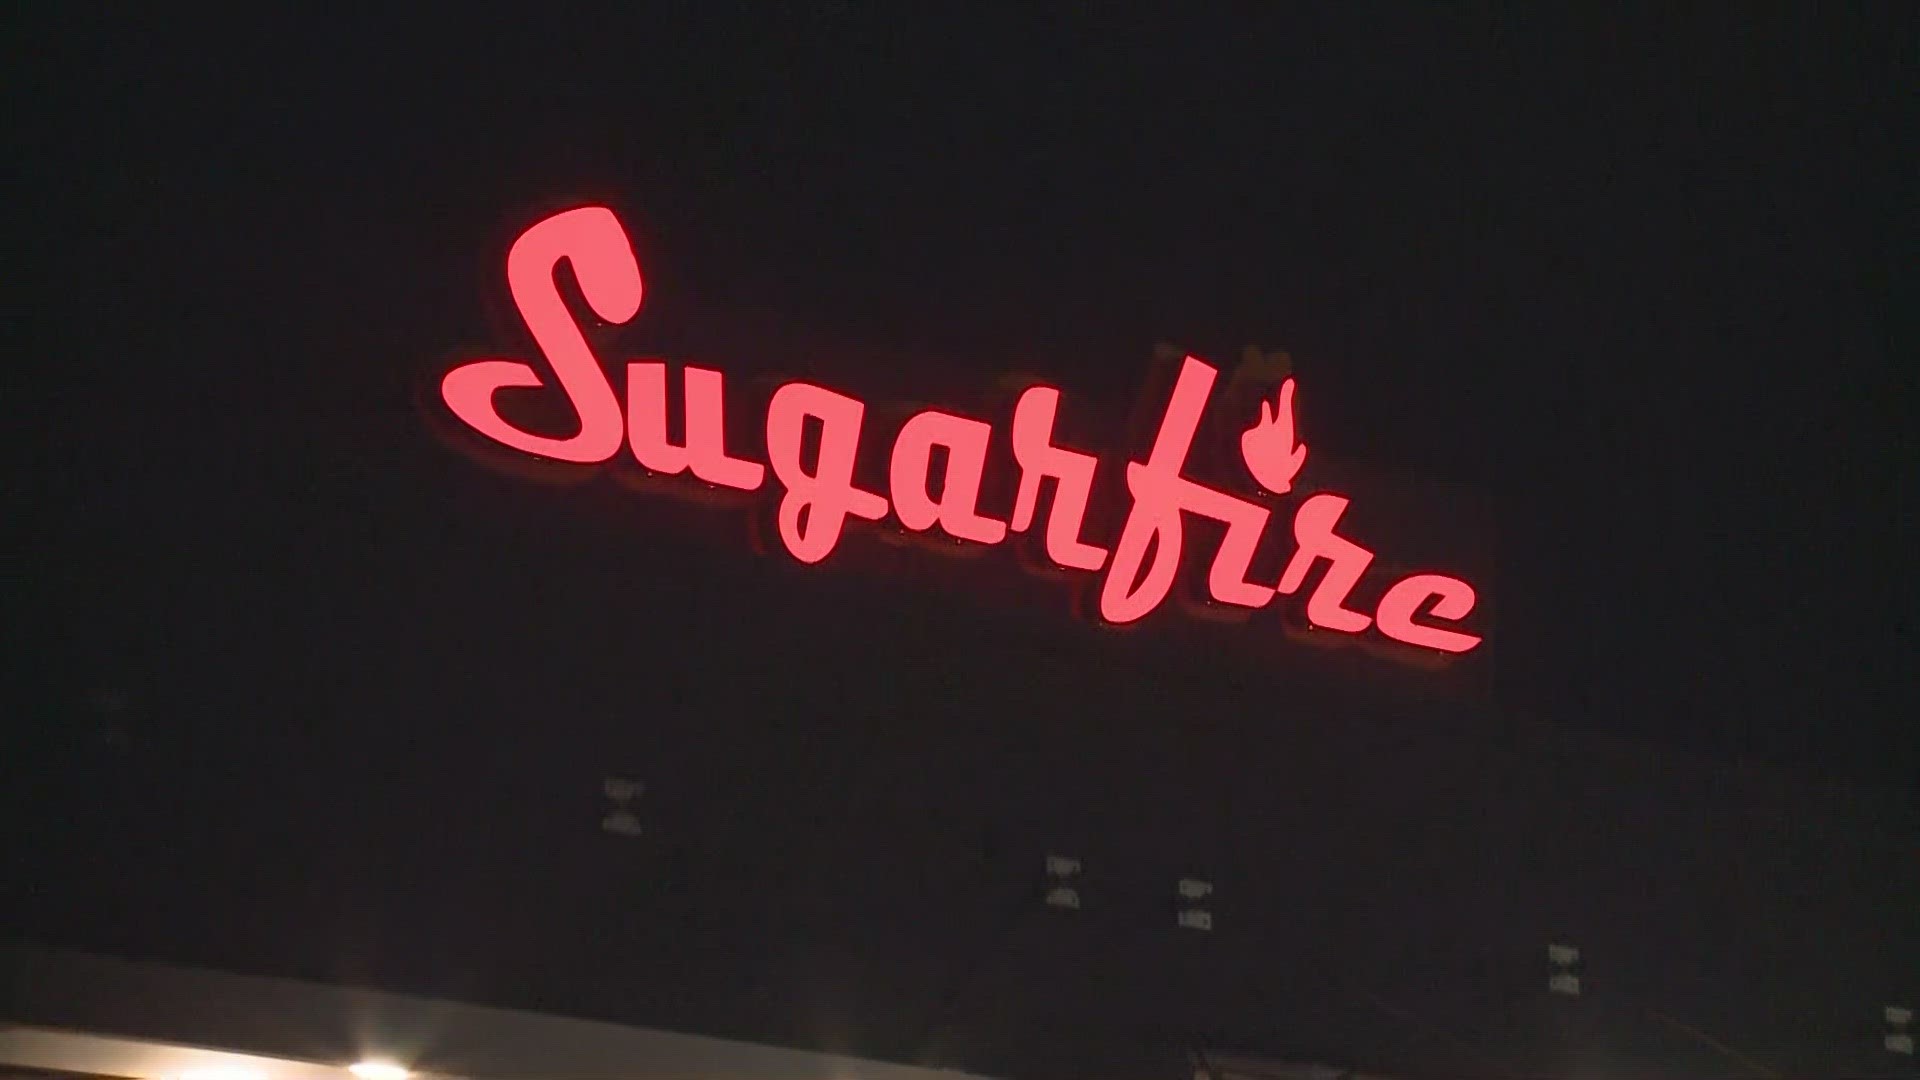 Sugarfire Smokehouse will open its 14th location Wednesday in Florissant. It's the first location to be majority woman-owned and operated.